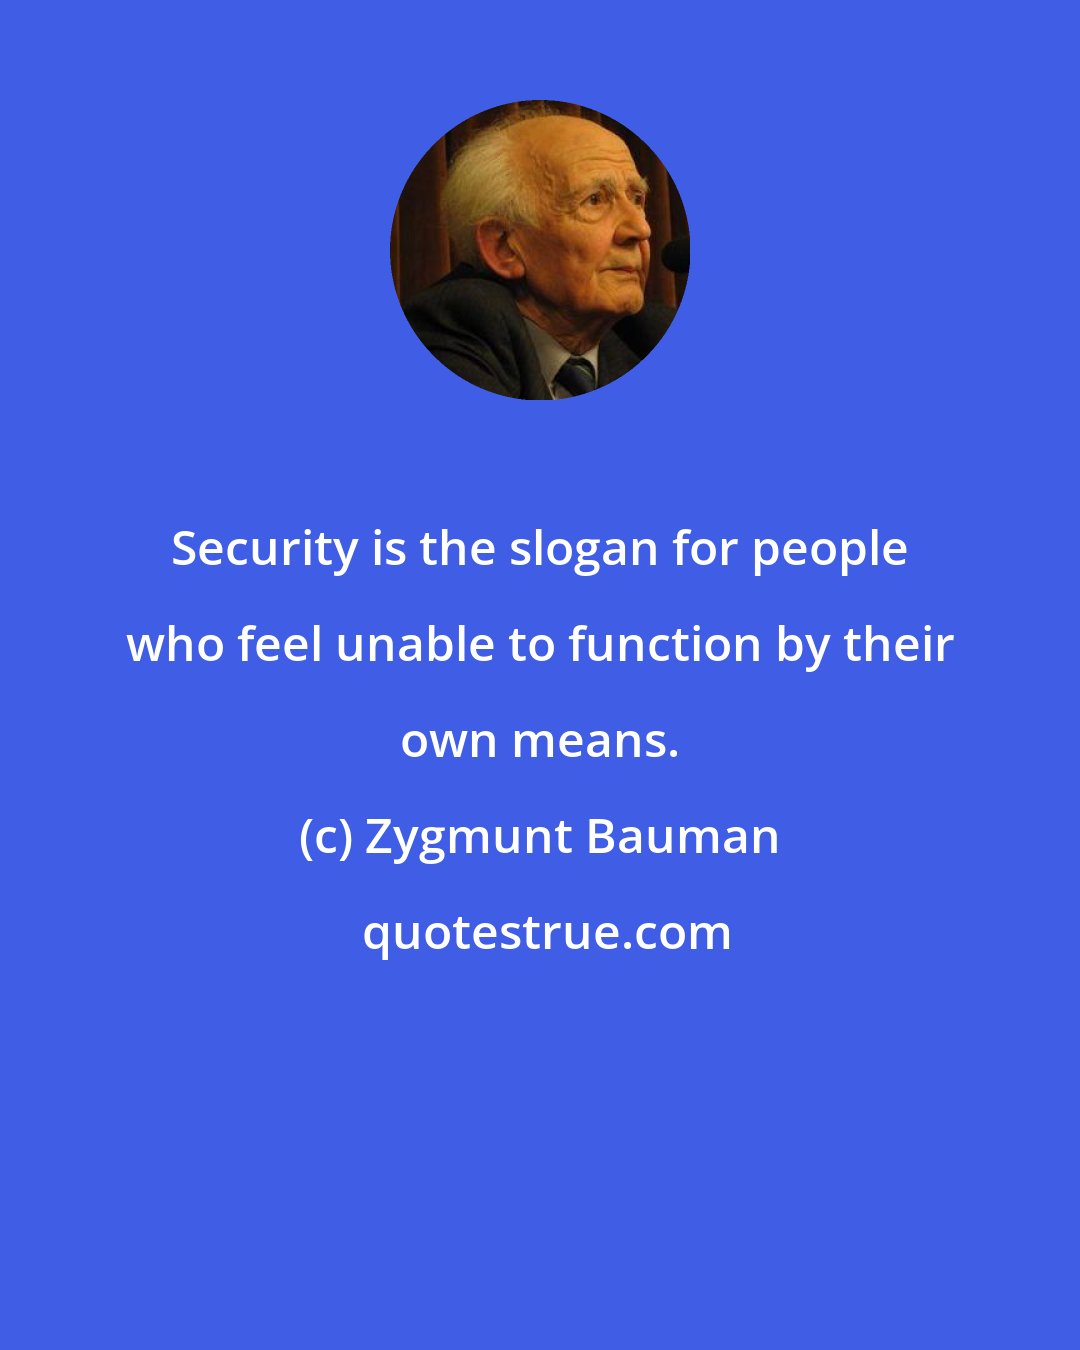 Zygmunt Bauman: Security is the slogan for people who feel unable to function by their own means.